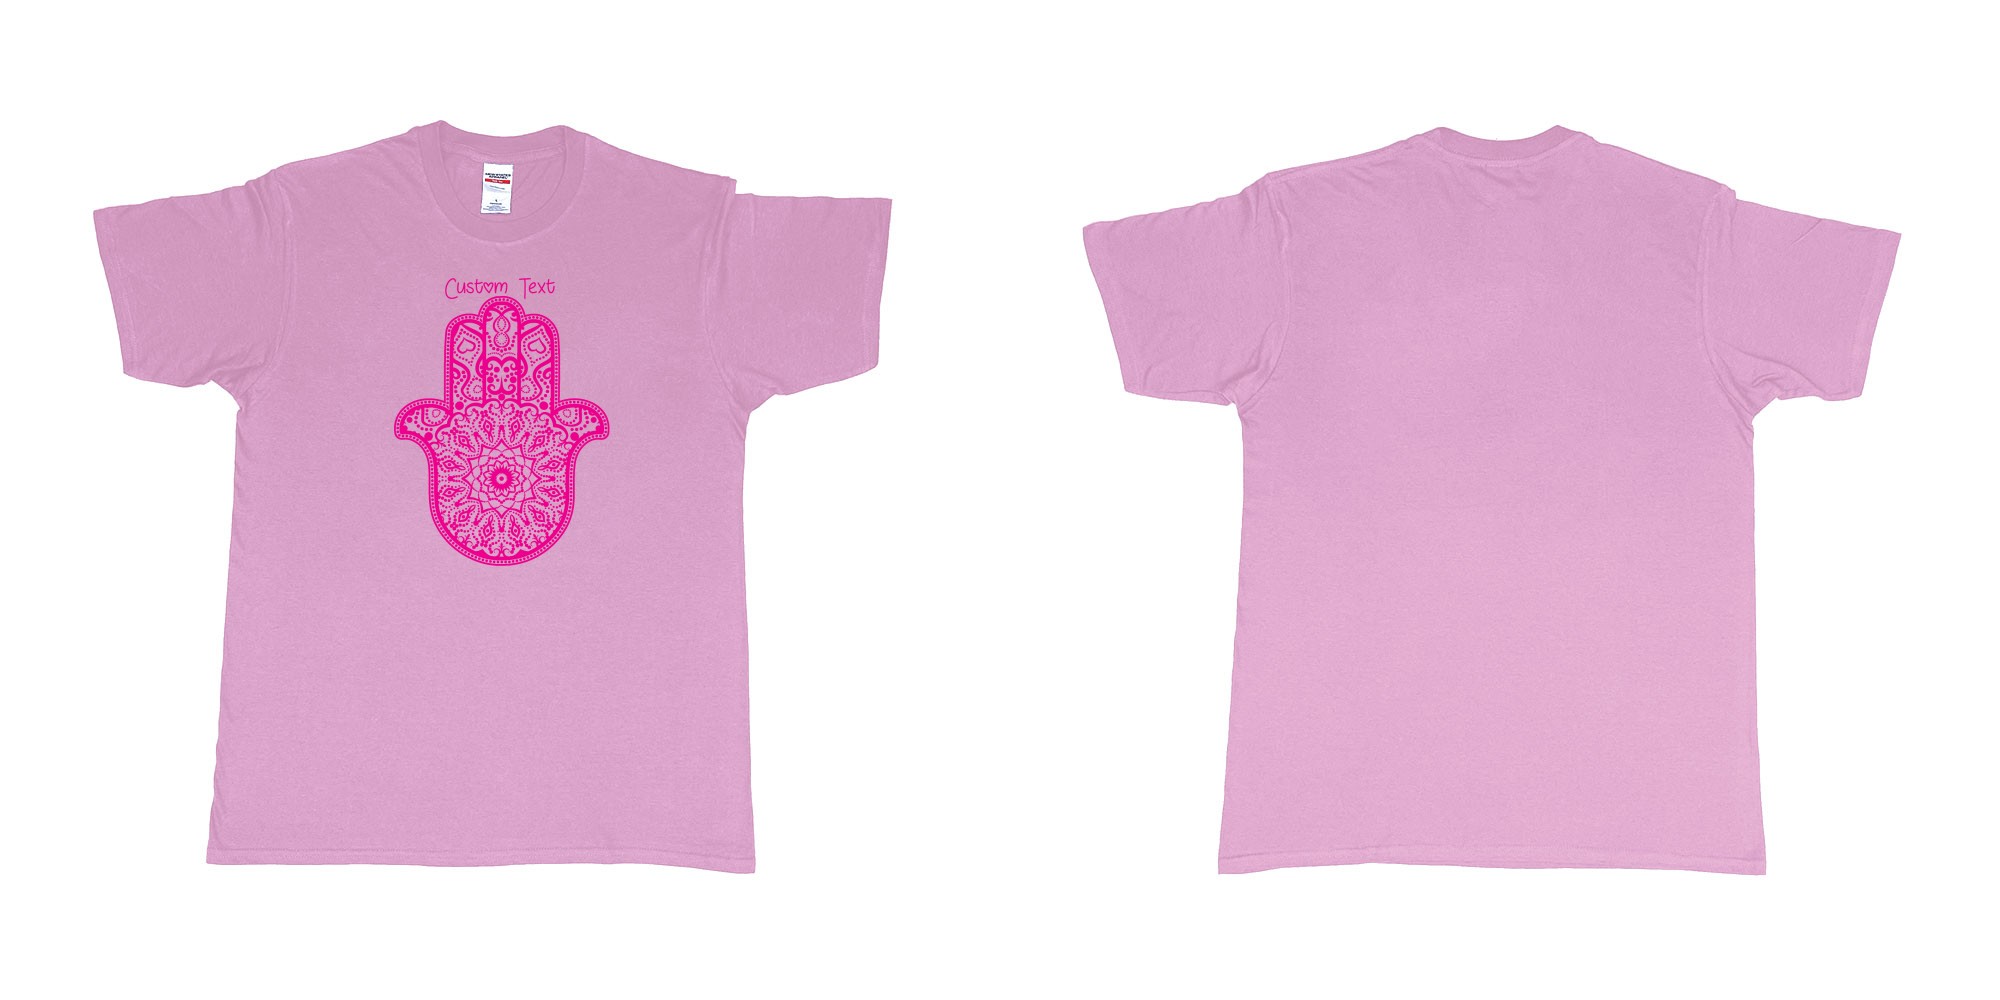 Custom tshirt design  in fabric color light-pink choice your own text made in Bali by The Pirate Way